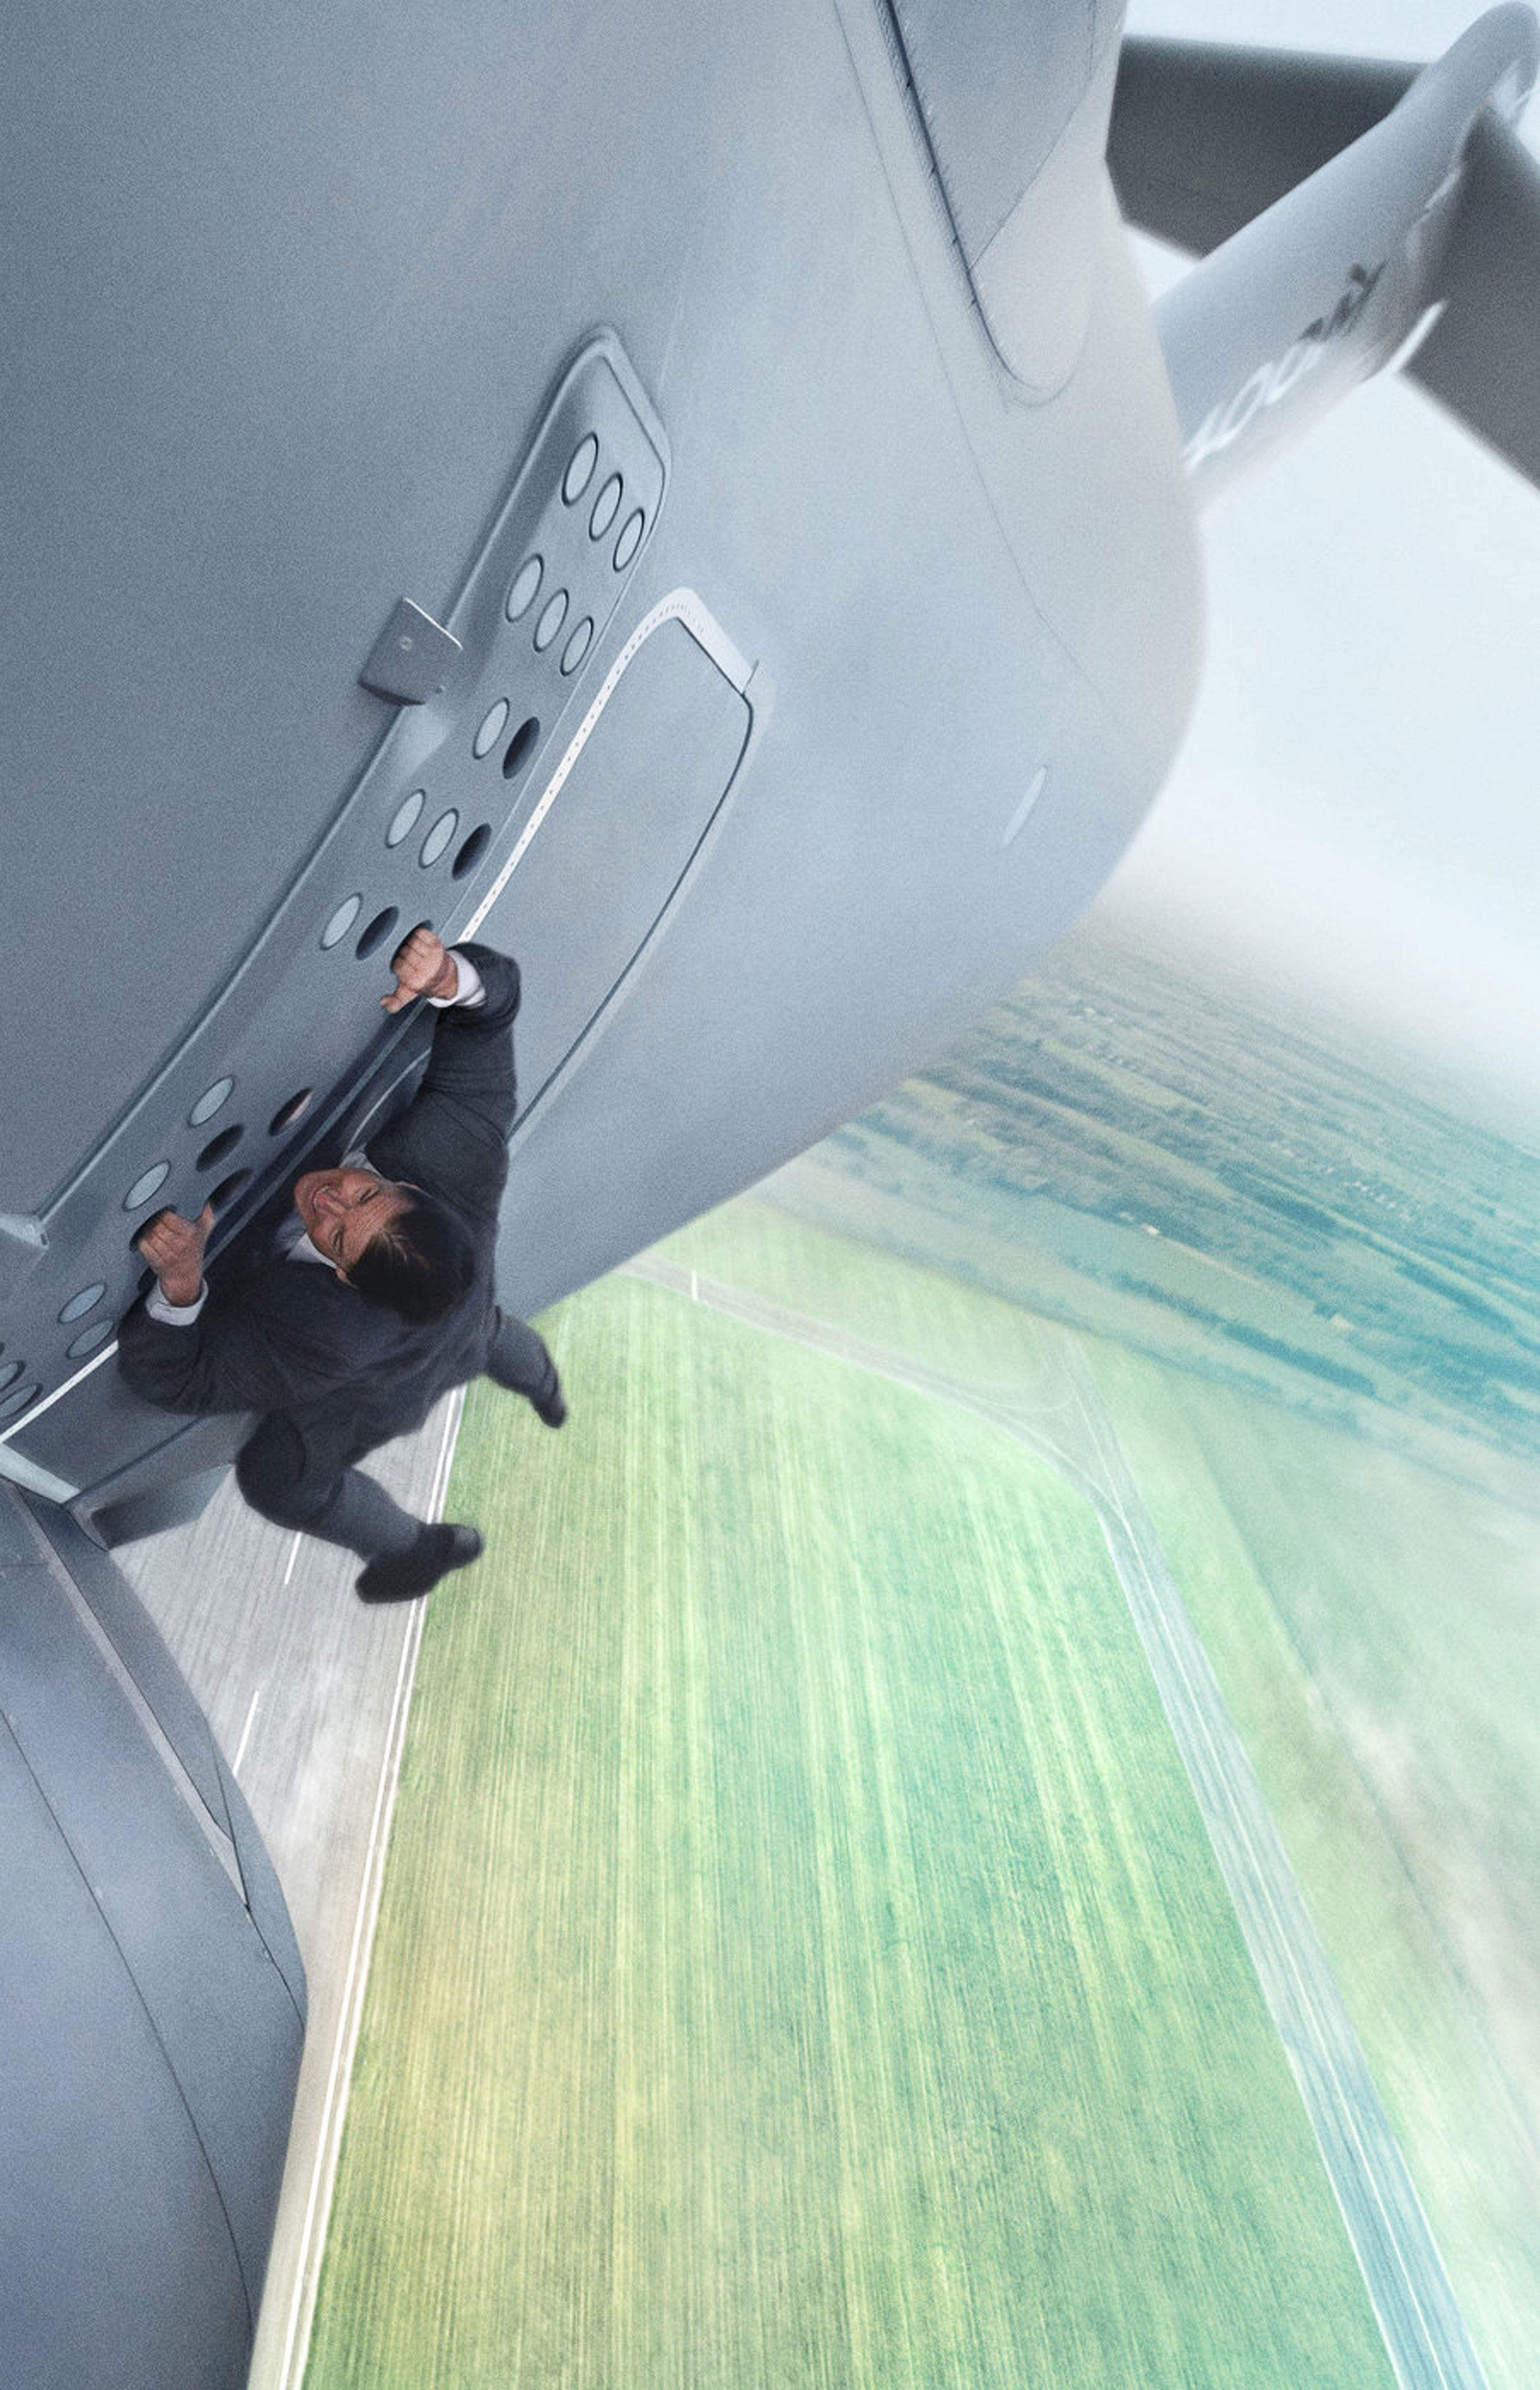 <p>In July 2015, Tom Cruise returned to the role of Ethan Hunt in "Mission: Impossible - Rogue Nation," the fifth installment in the "Mission: Impossible" franchise -- the 16th highest grossing film series ever at the time. The A-list actor, who frequently performs his own stunts, has garnered attention for the plane stunt he shot for the film, which he's called "undoubtedly the most dangerous thing I've ever done."</p>